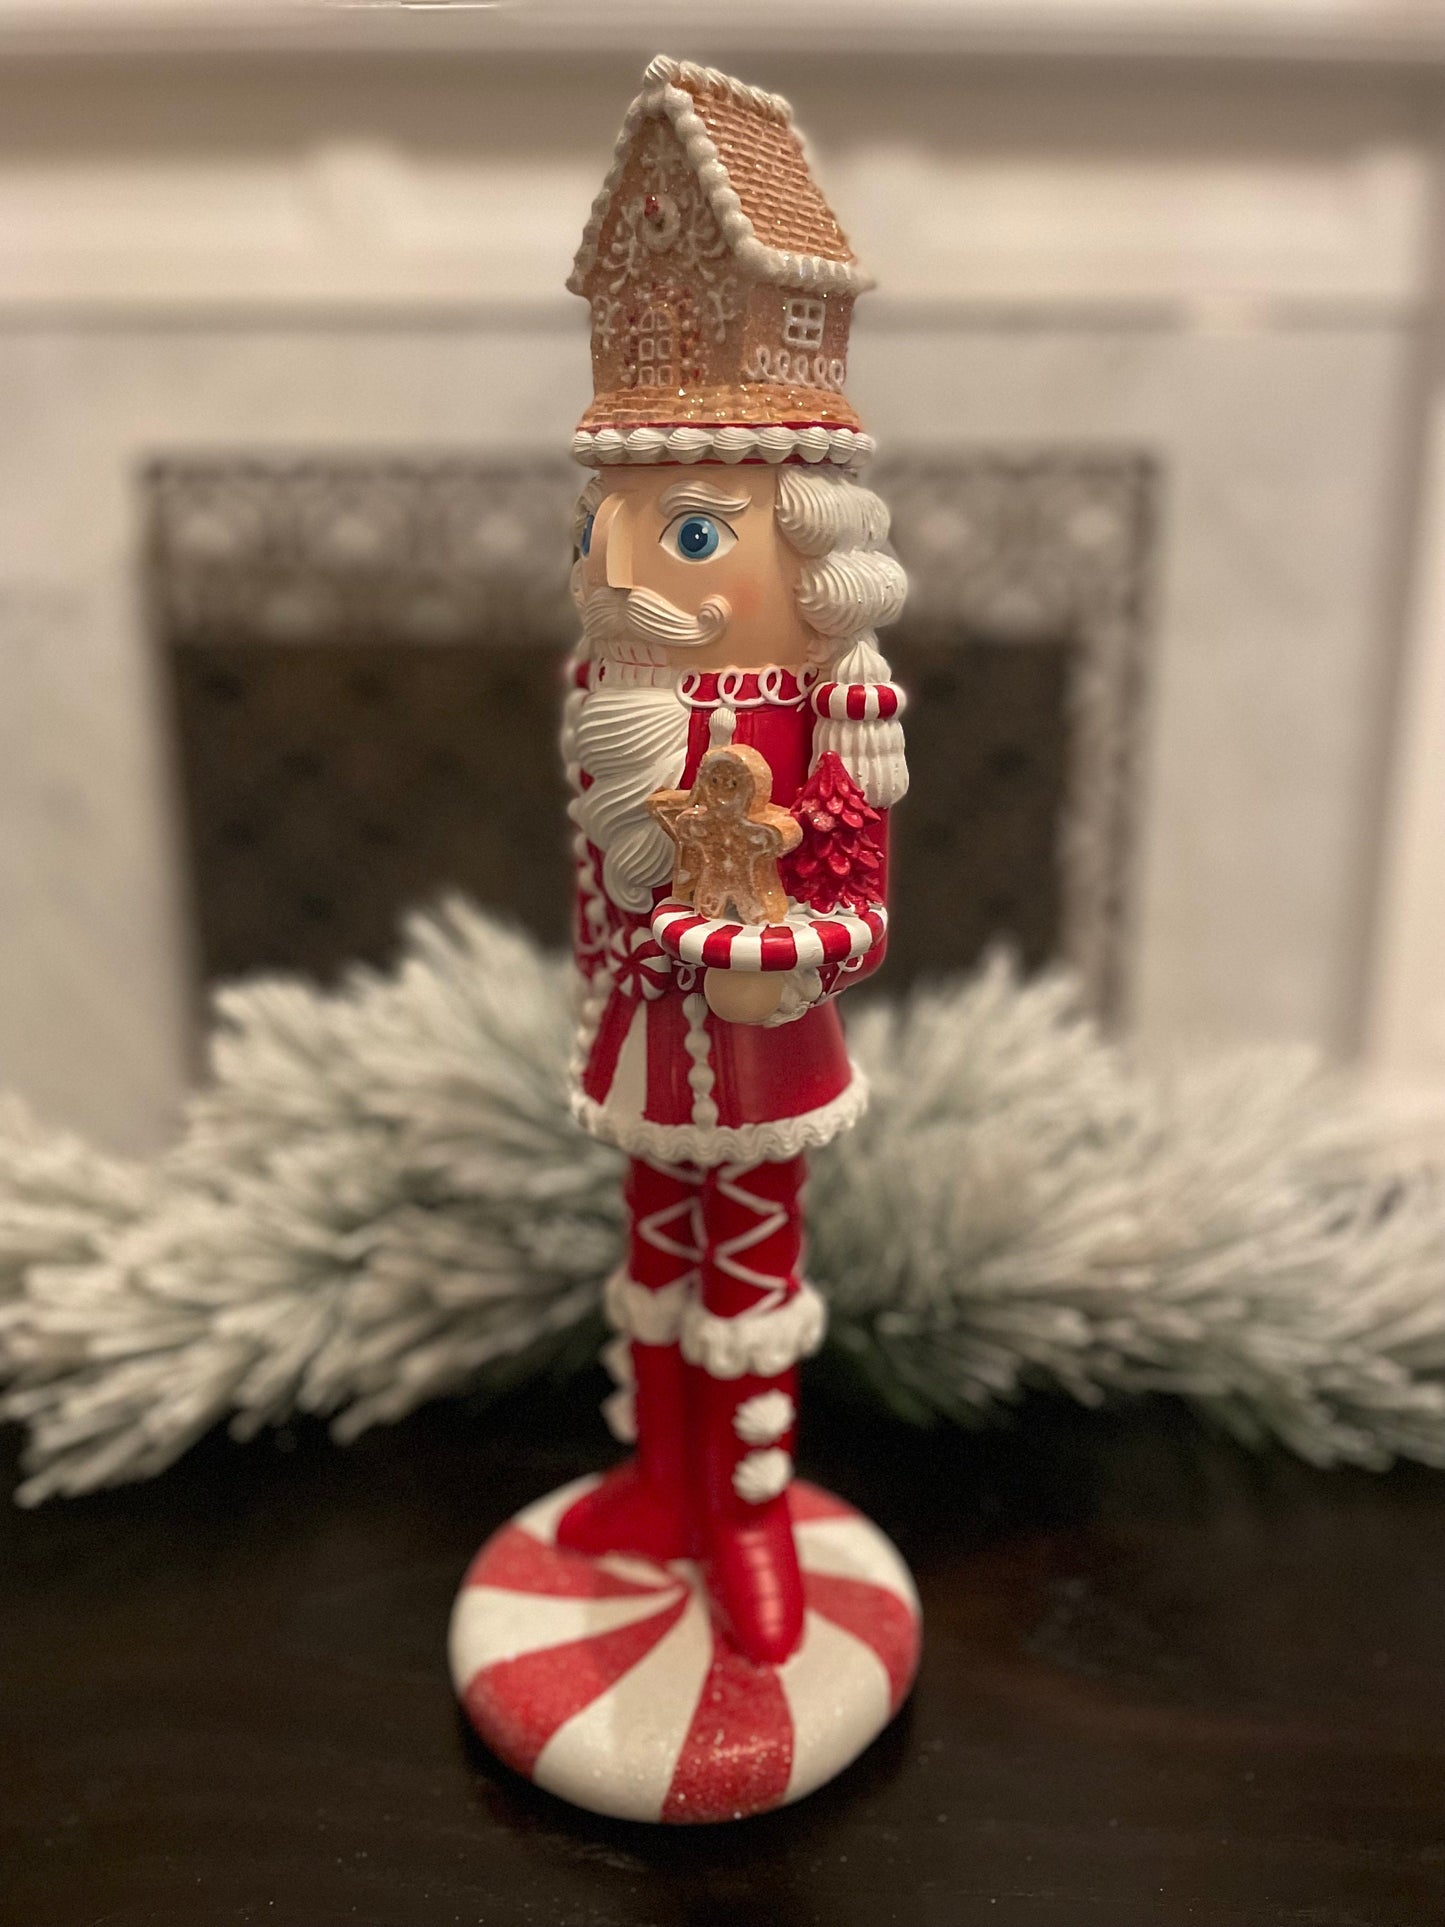 17.5” Nutcracker with gingerbread house, resin peppermint red and white. Sweet nutcracker!